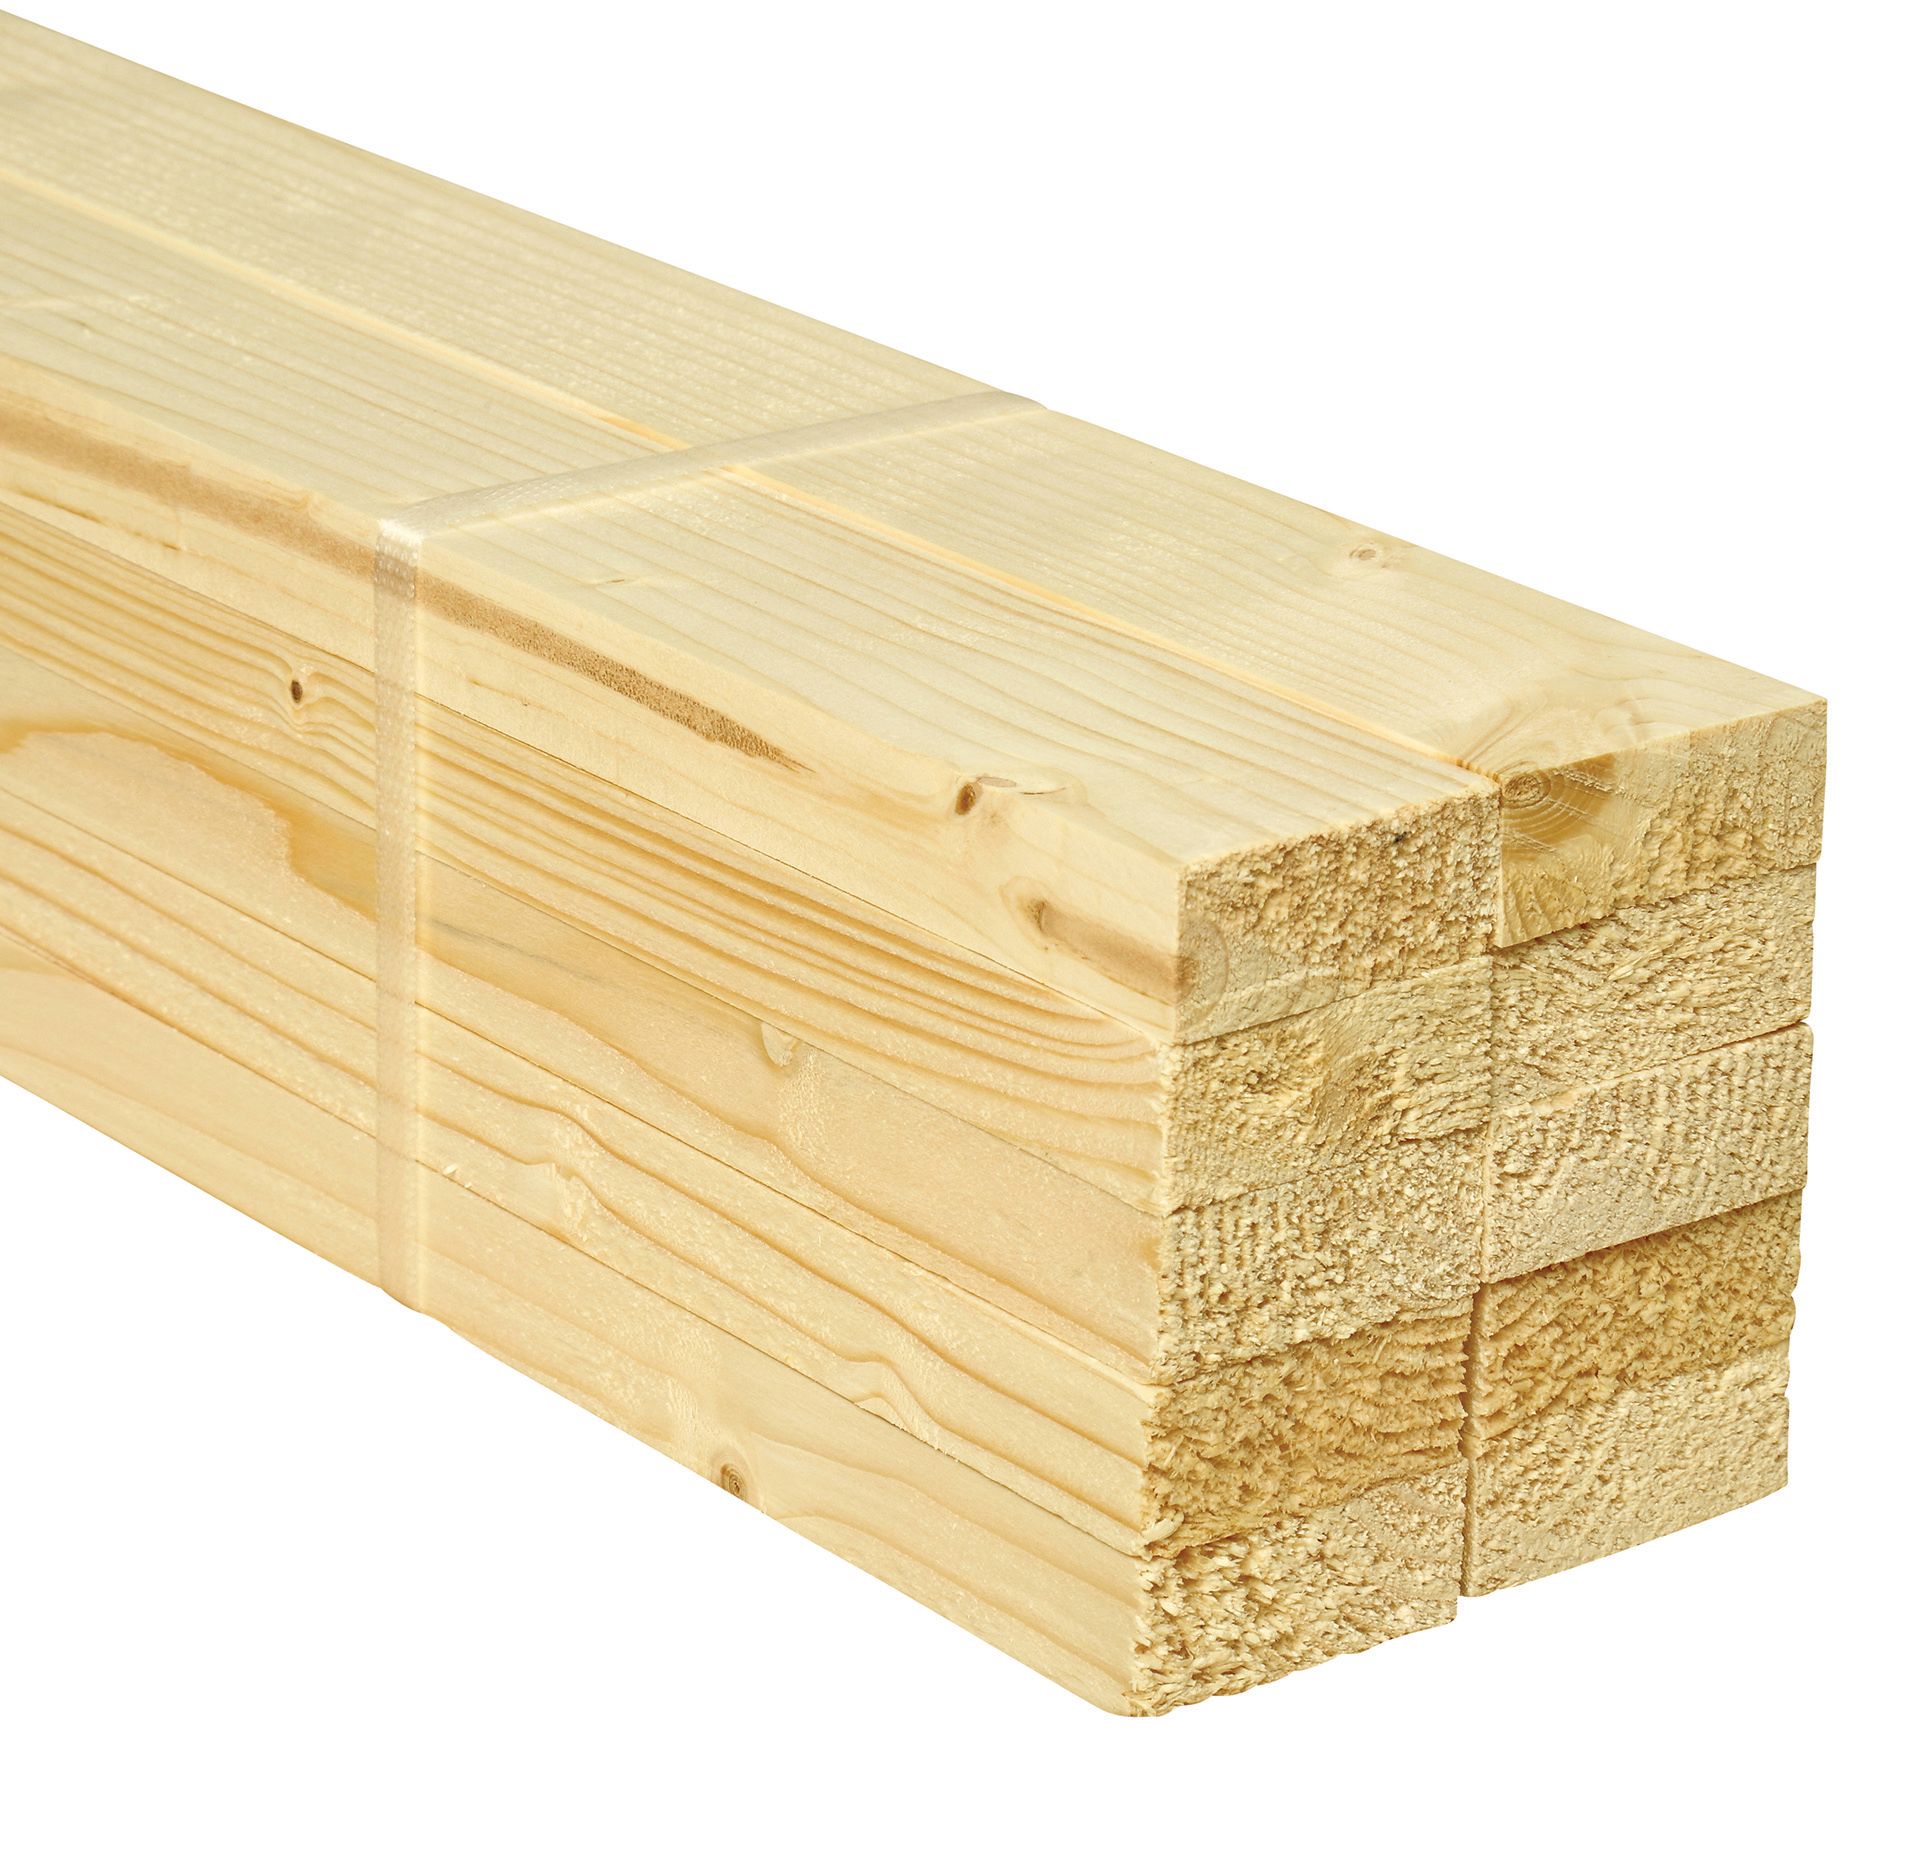 Image of Wickes Whitewood PSE Timber - 18 x 44 x 2400mm - Pack of 10